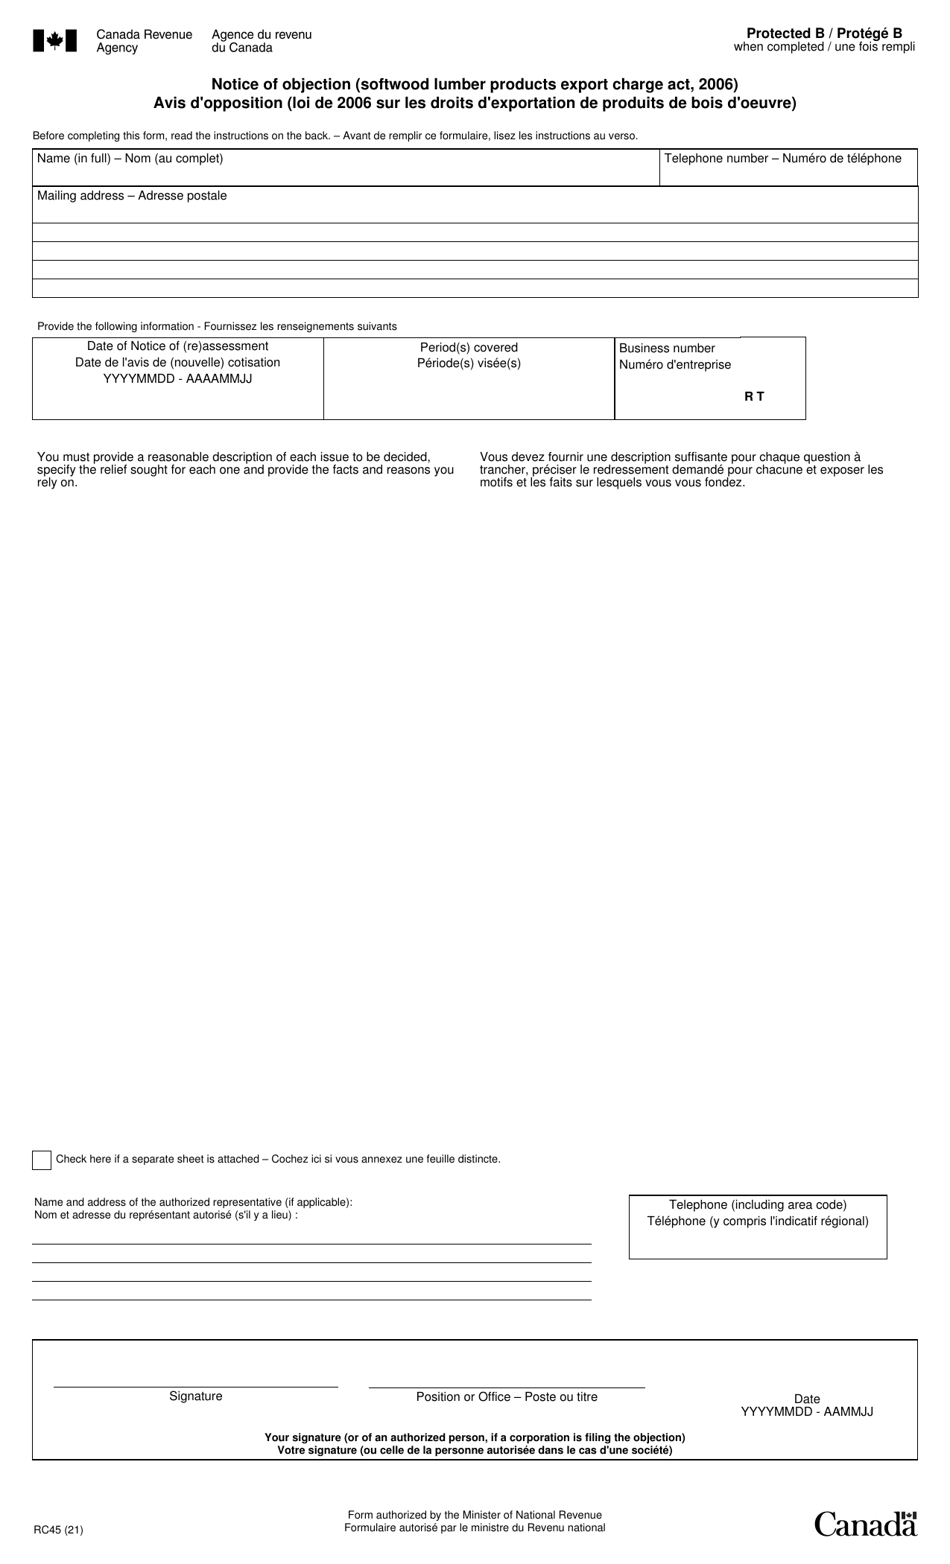 Form RC45 Notice of Objection (Softwood Lumber Products Export Charge Act, 2006) - Canada (English / French), Page 1